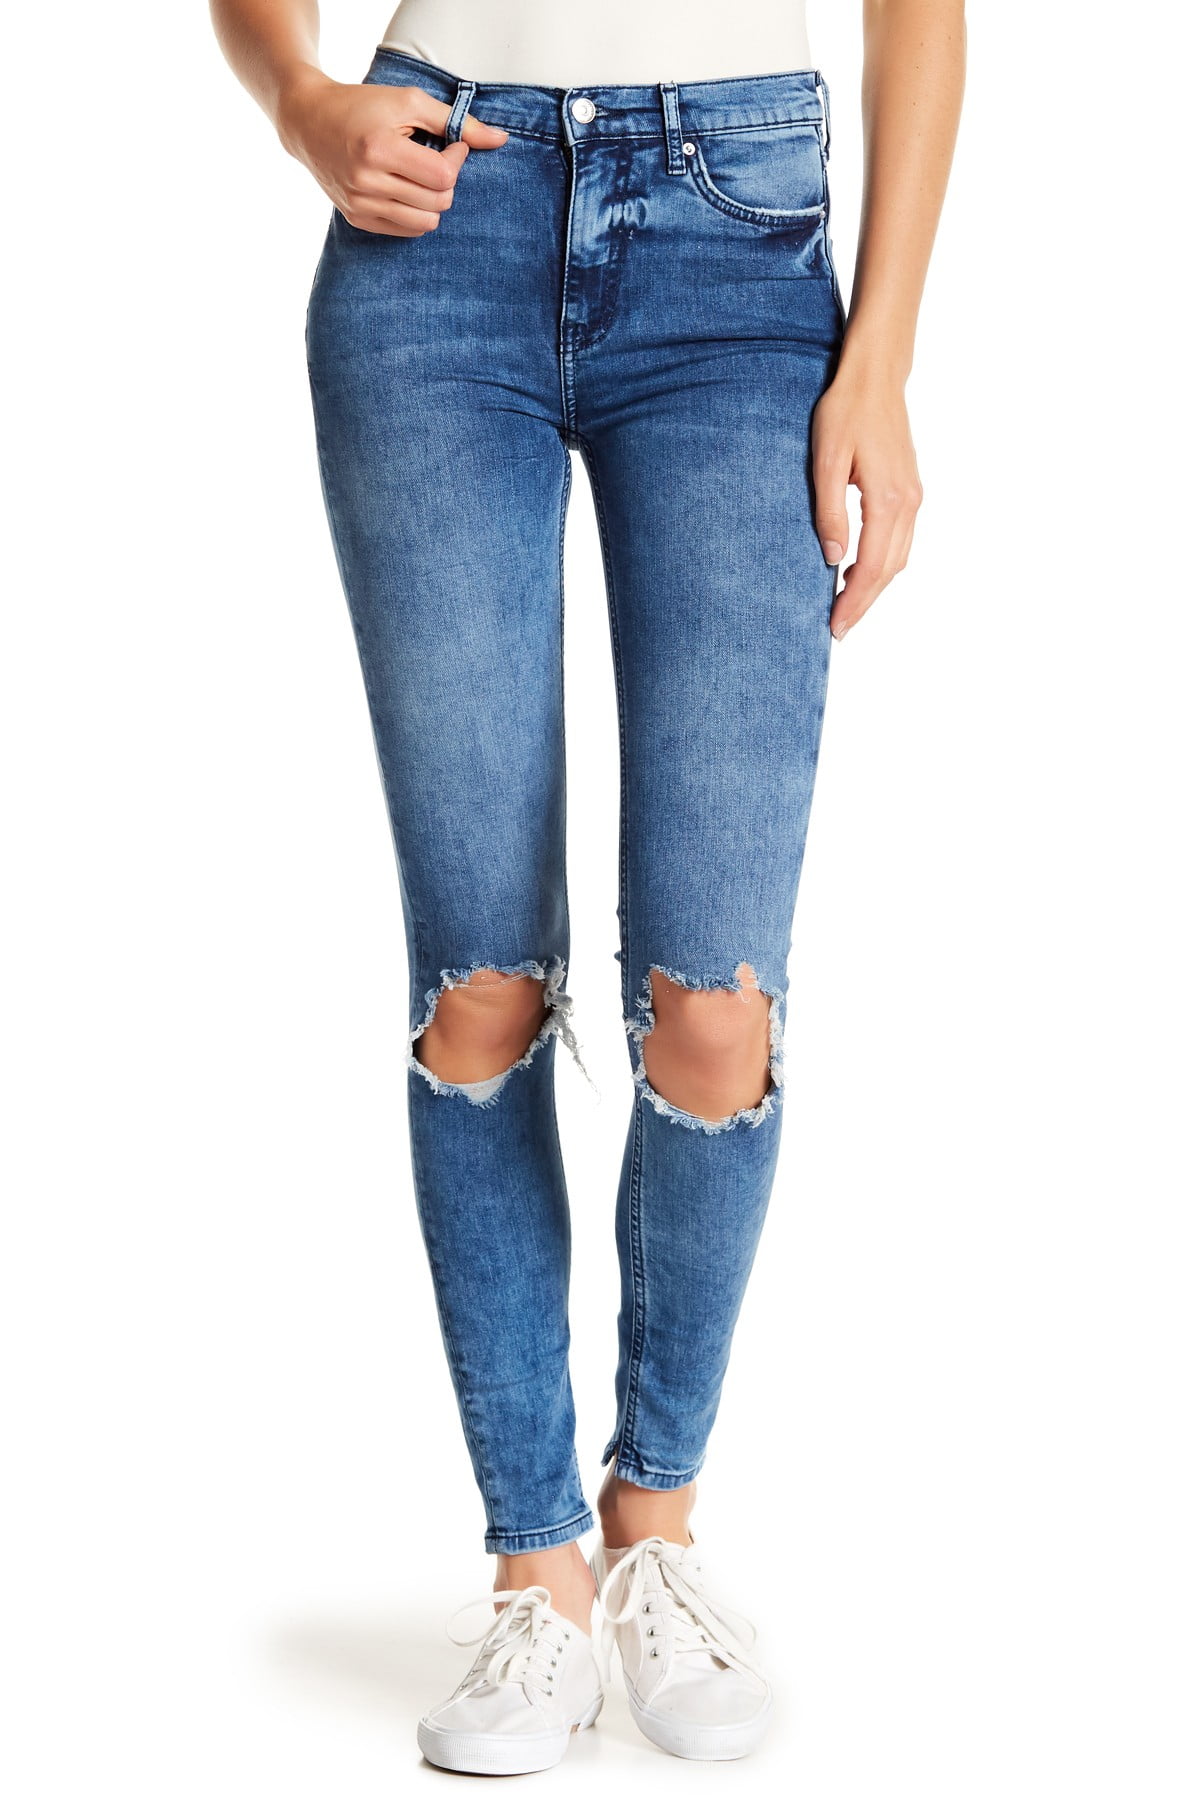 free people busted knee jeans